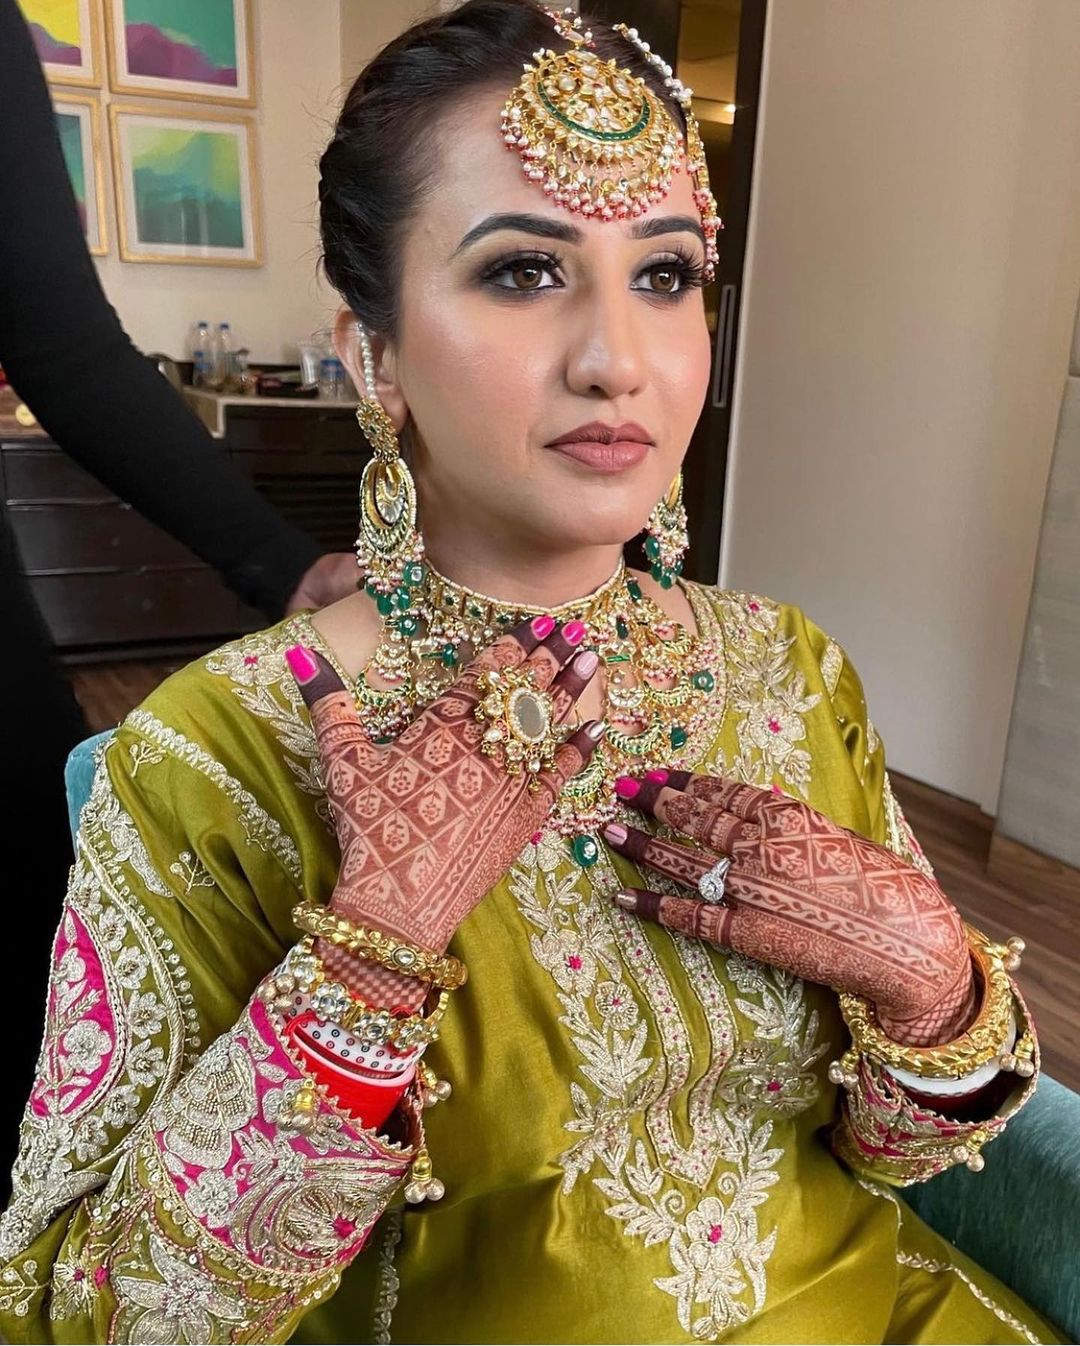 Arabic Salon And Makeup Academy in rajpura,Patiala - Best Beauty Parlour  Classes in Patiala - Justdial